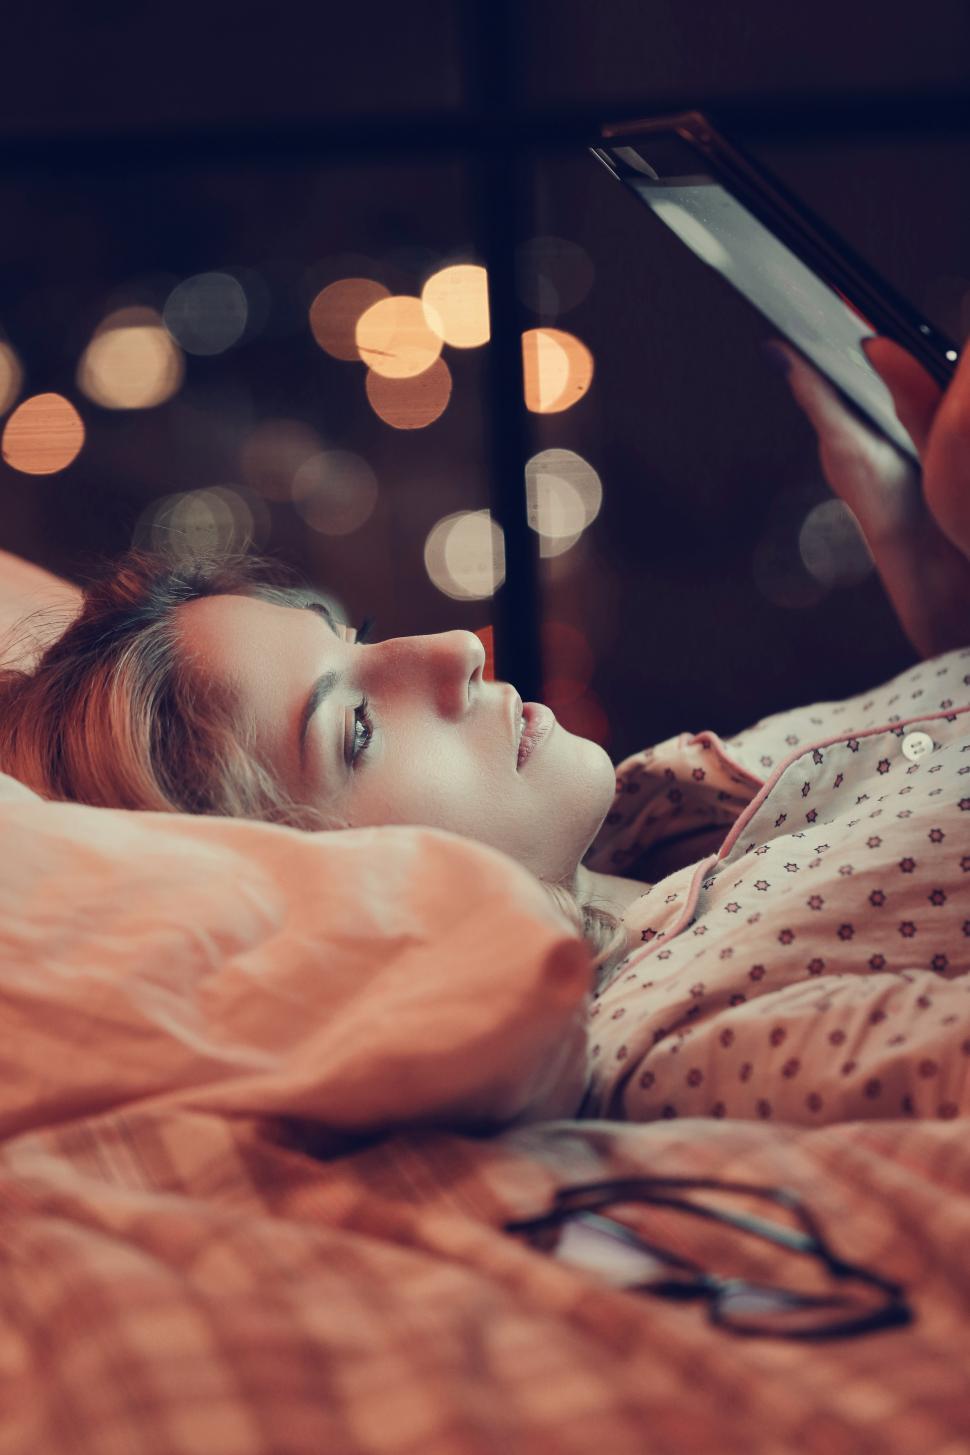 Free Image of Girl in bed reading from a tablet 